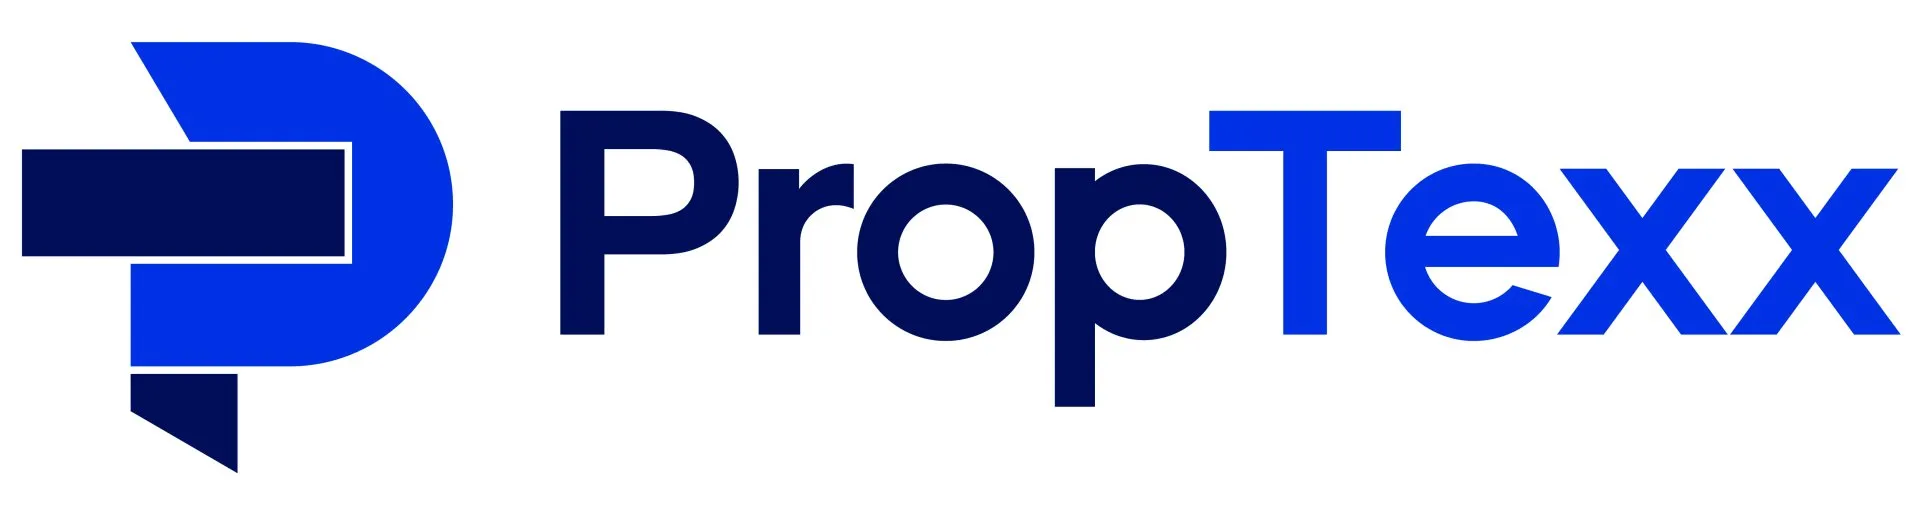 PropTexx